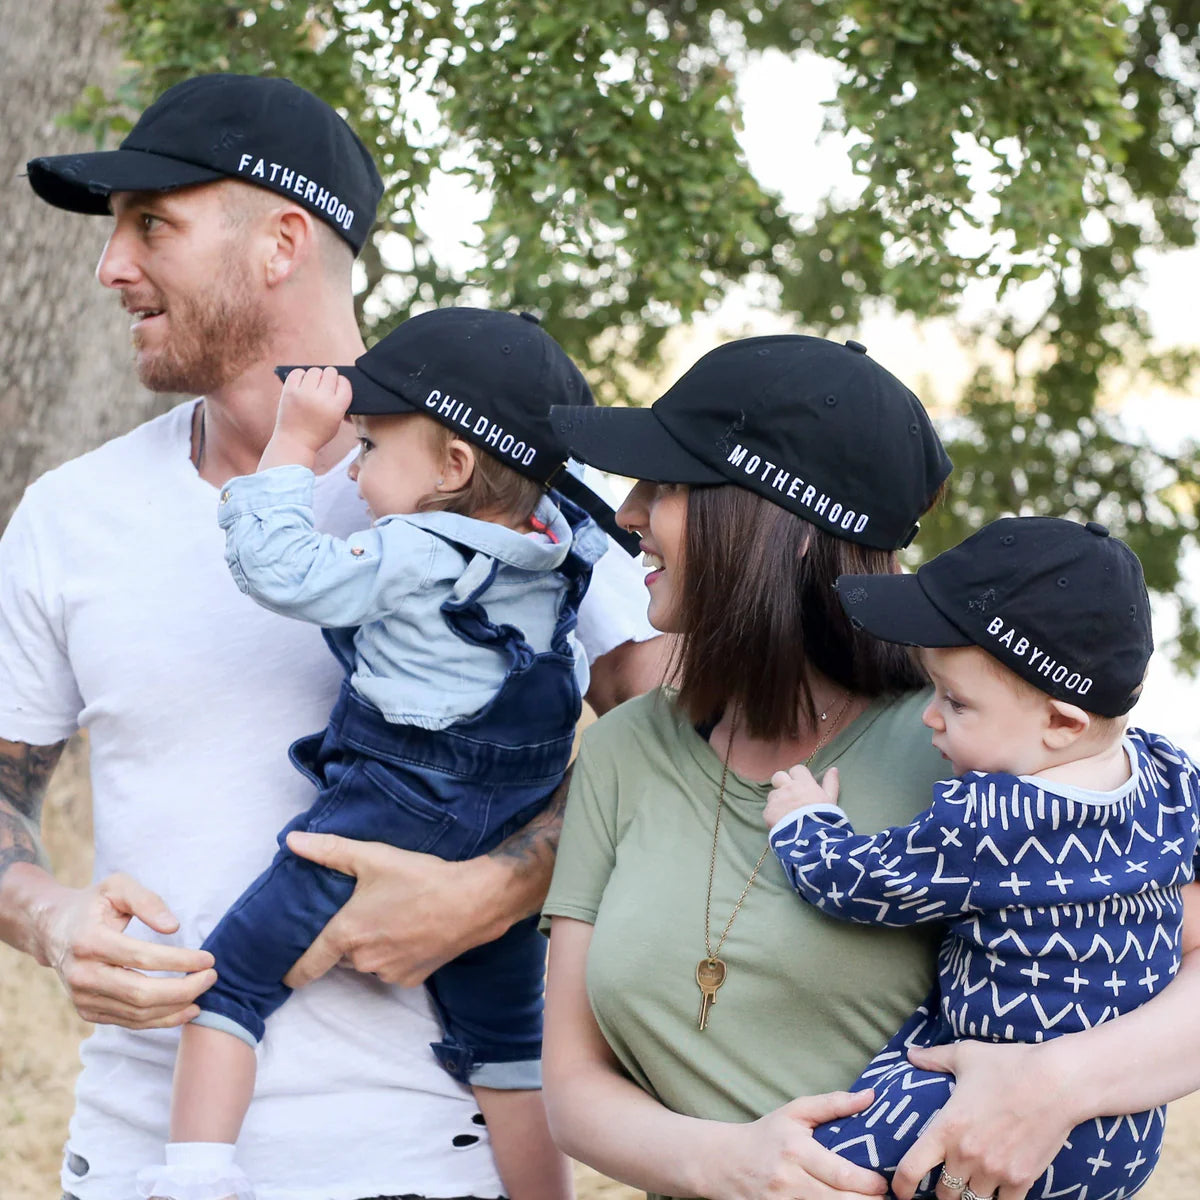 A family wearing matching hats